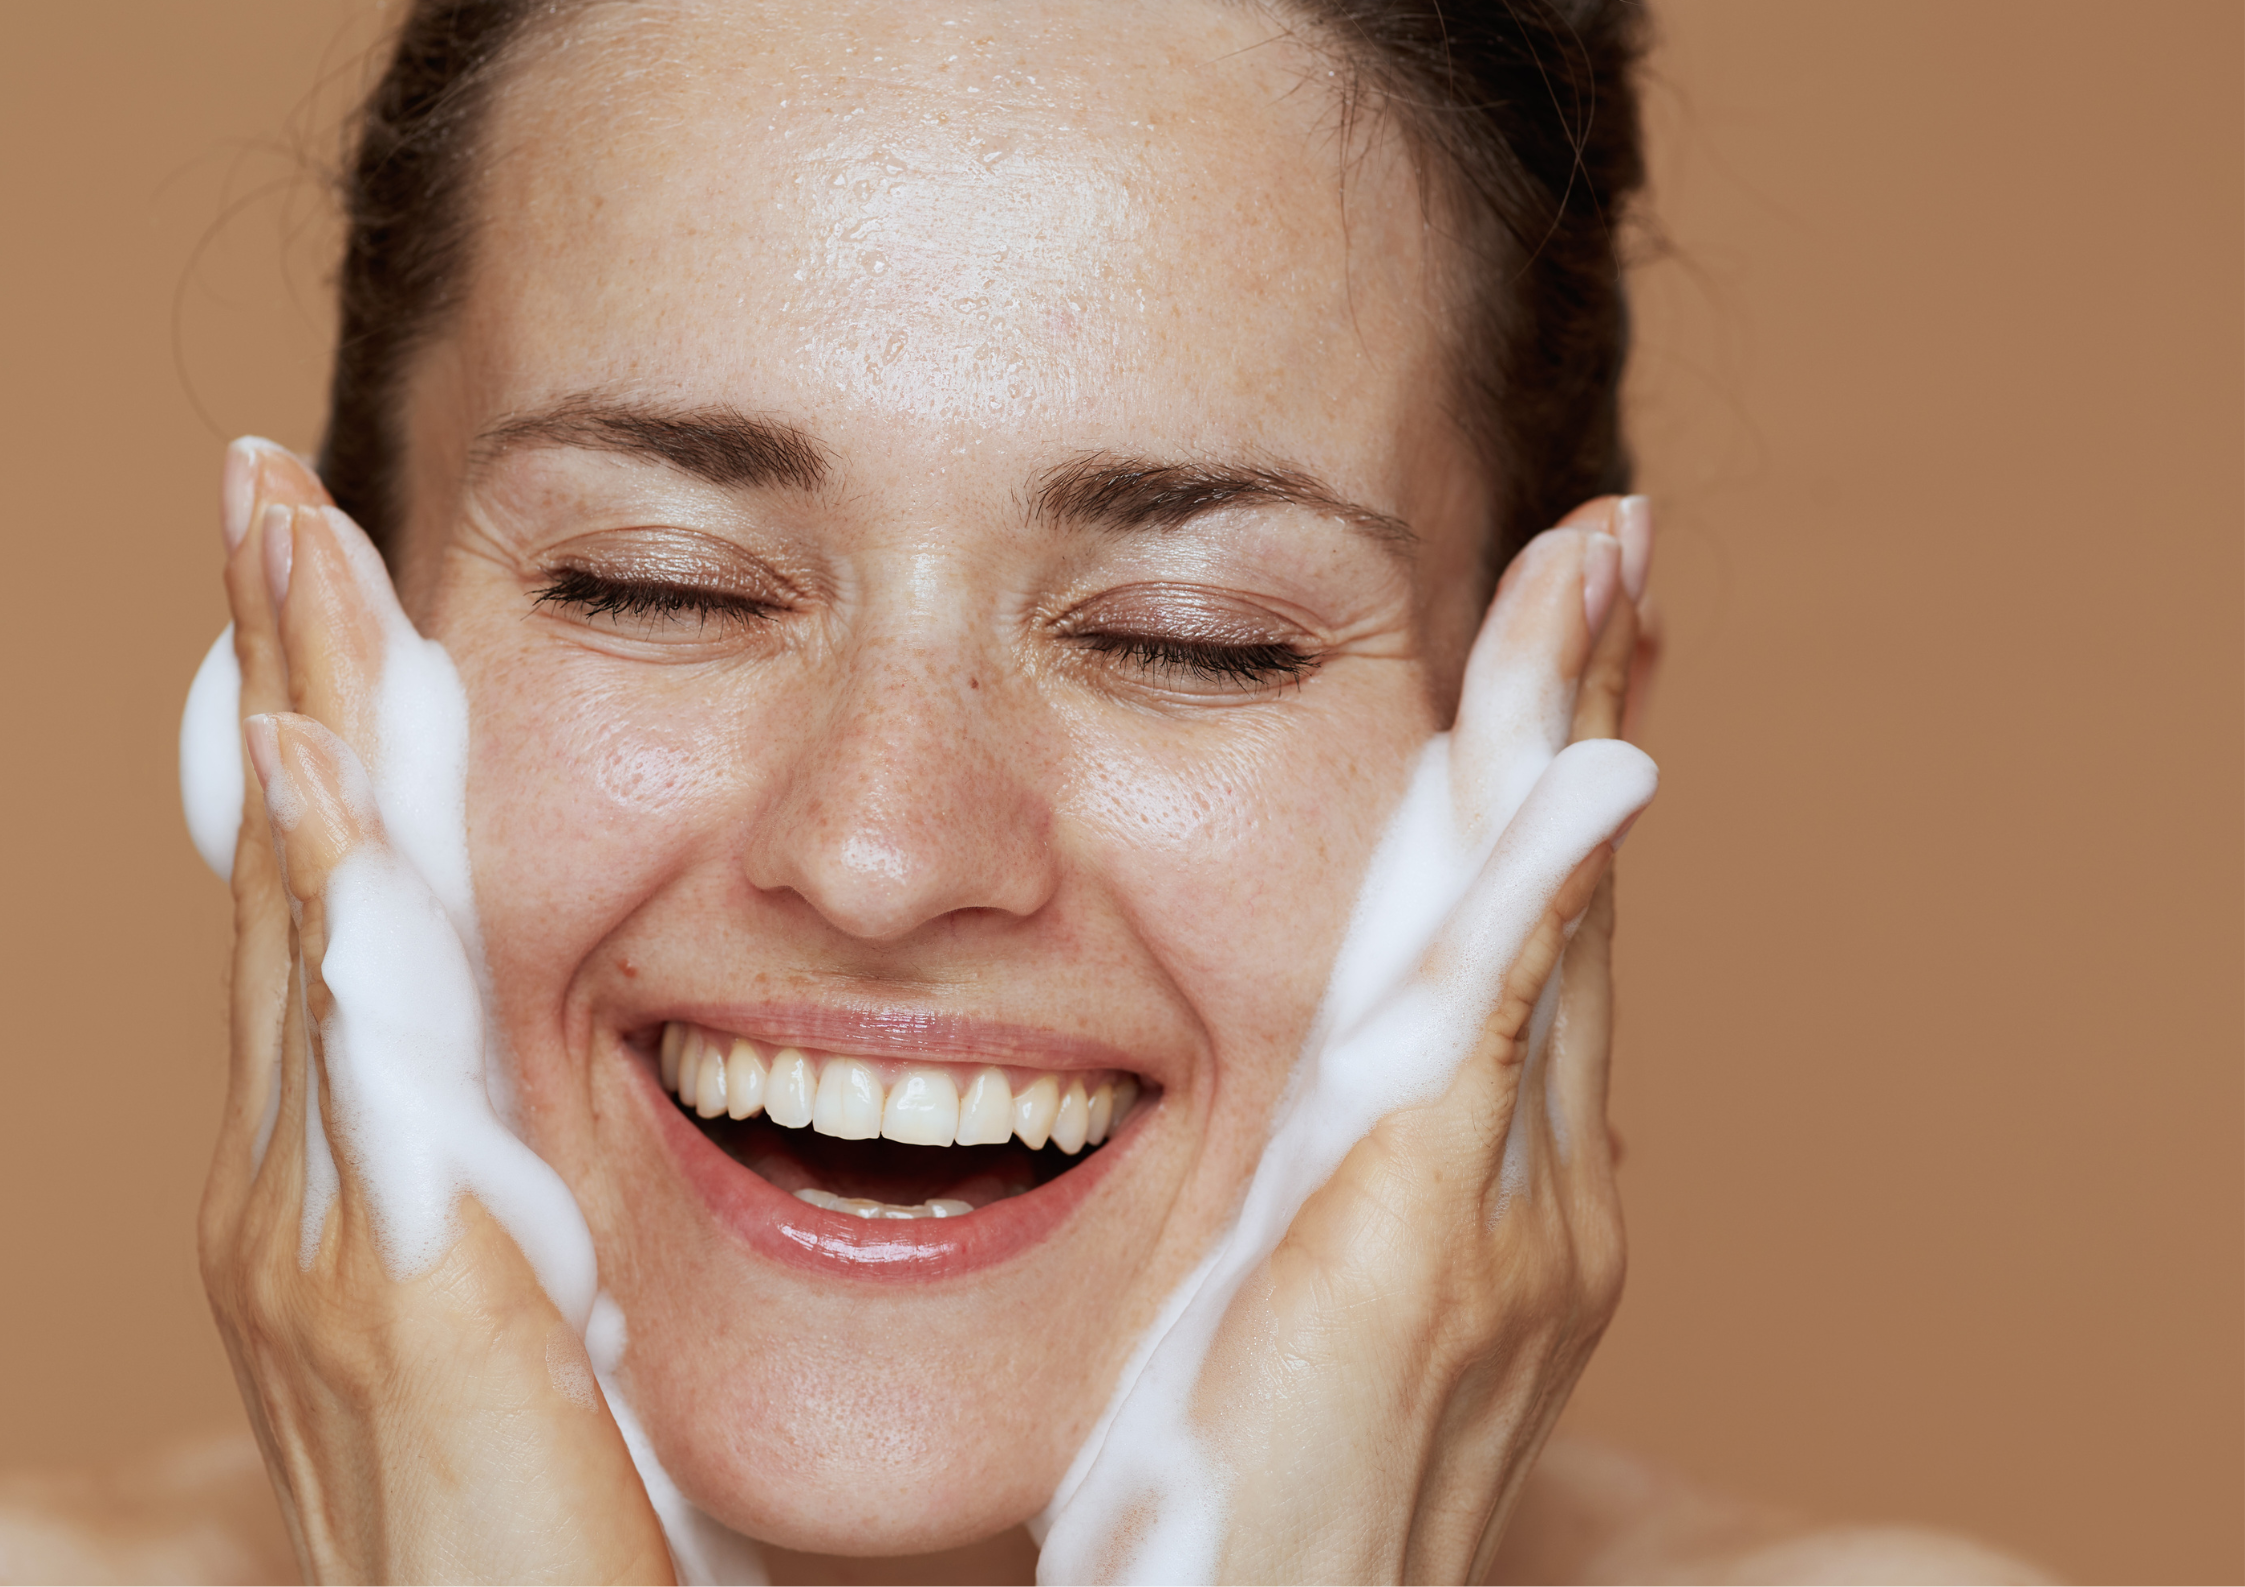 Choosing the Right Skin Cleansers and Moisturizers